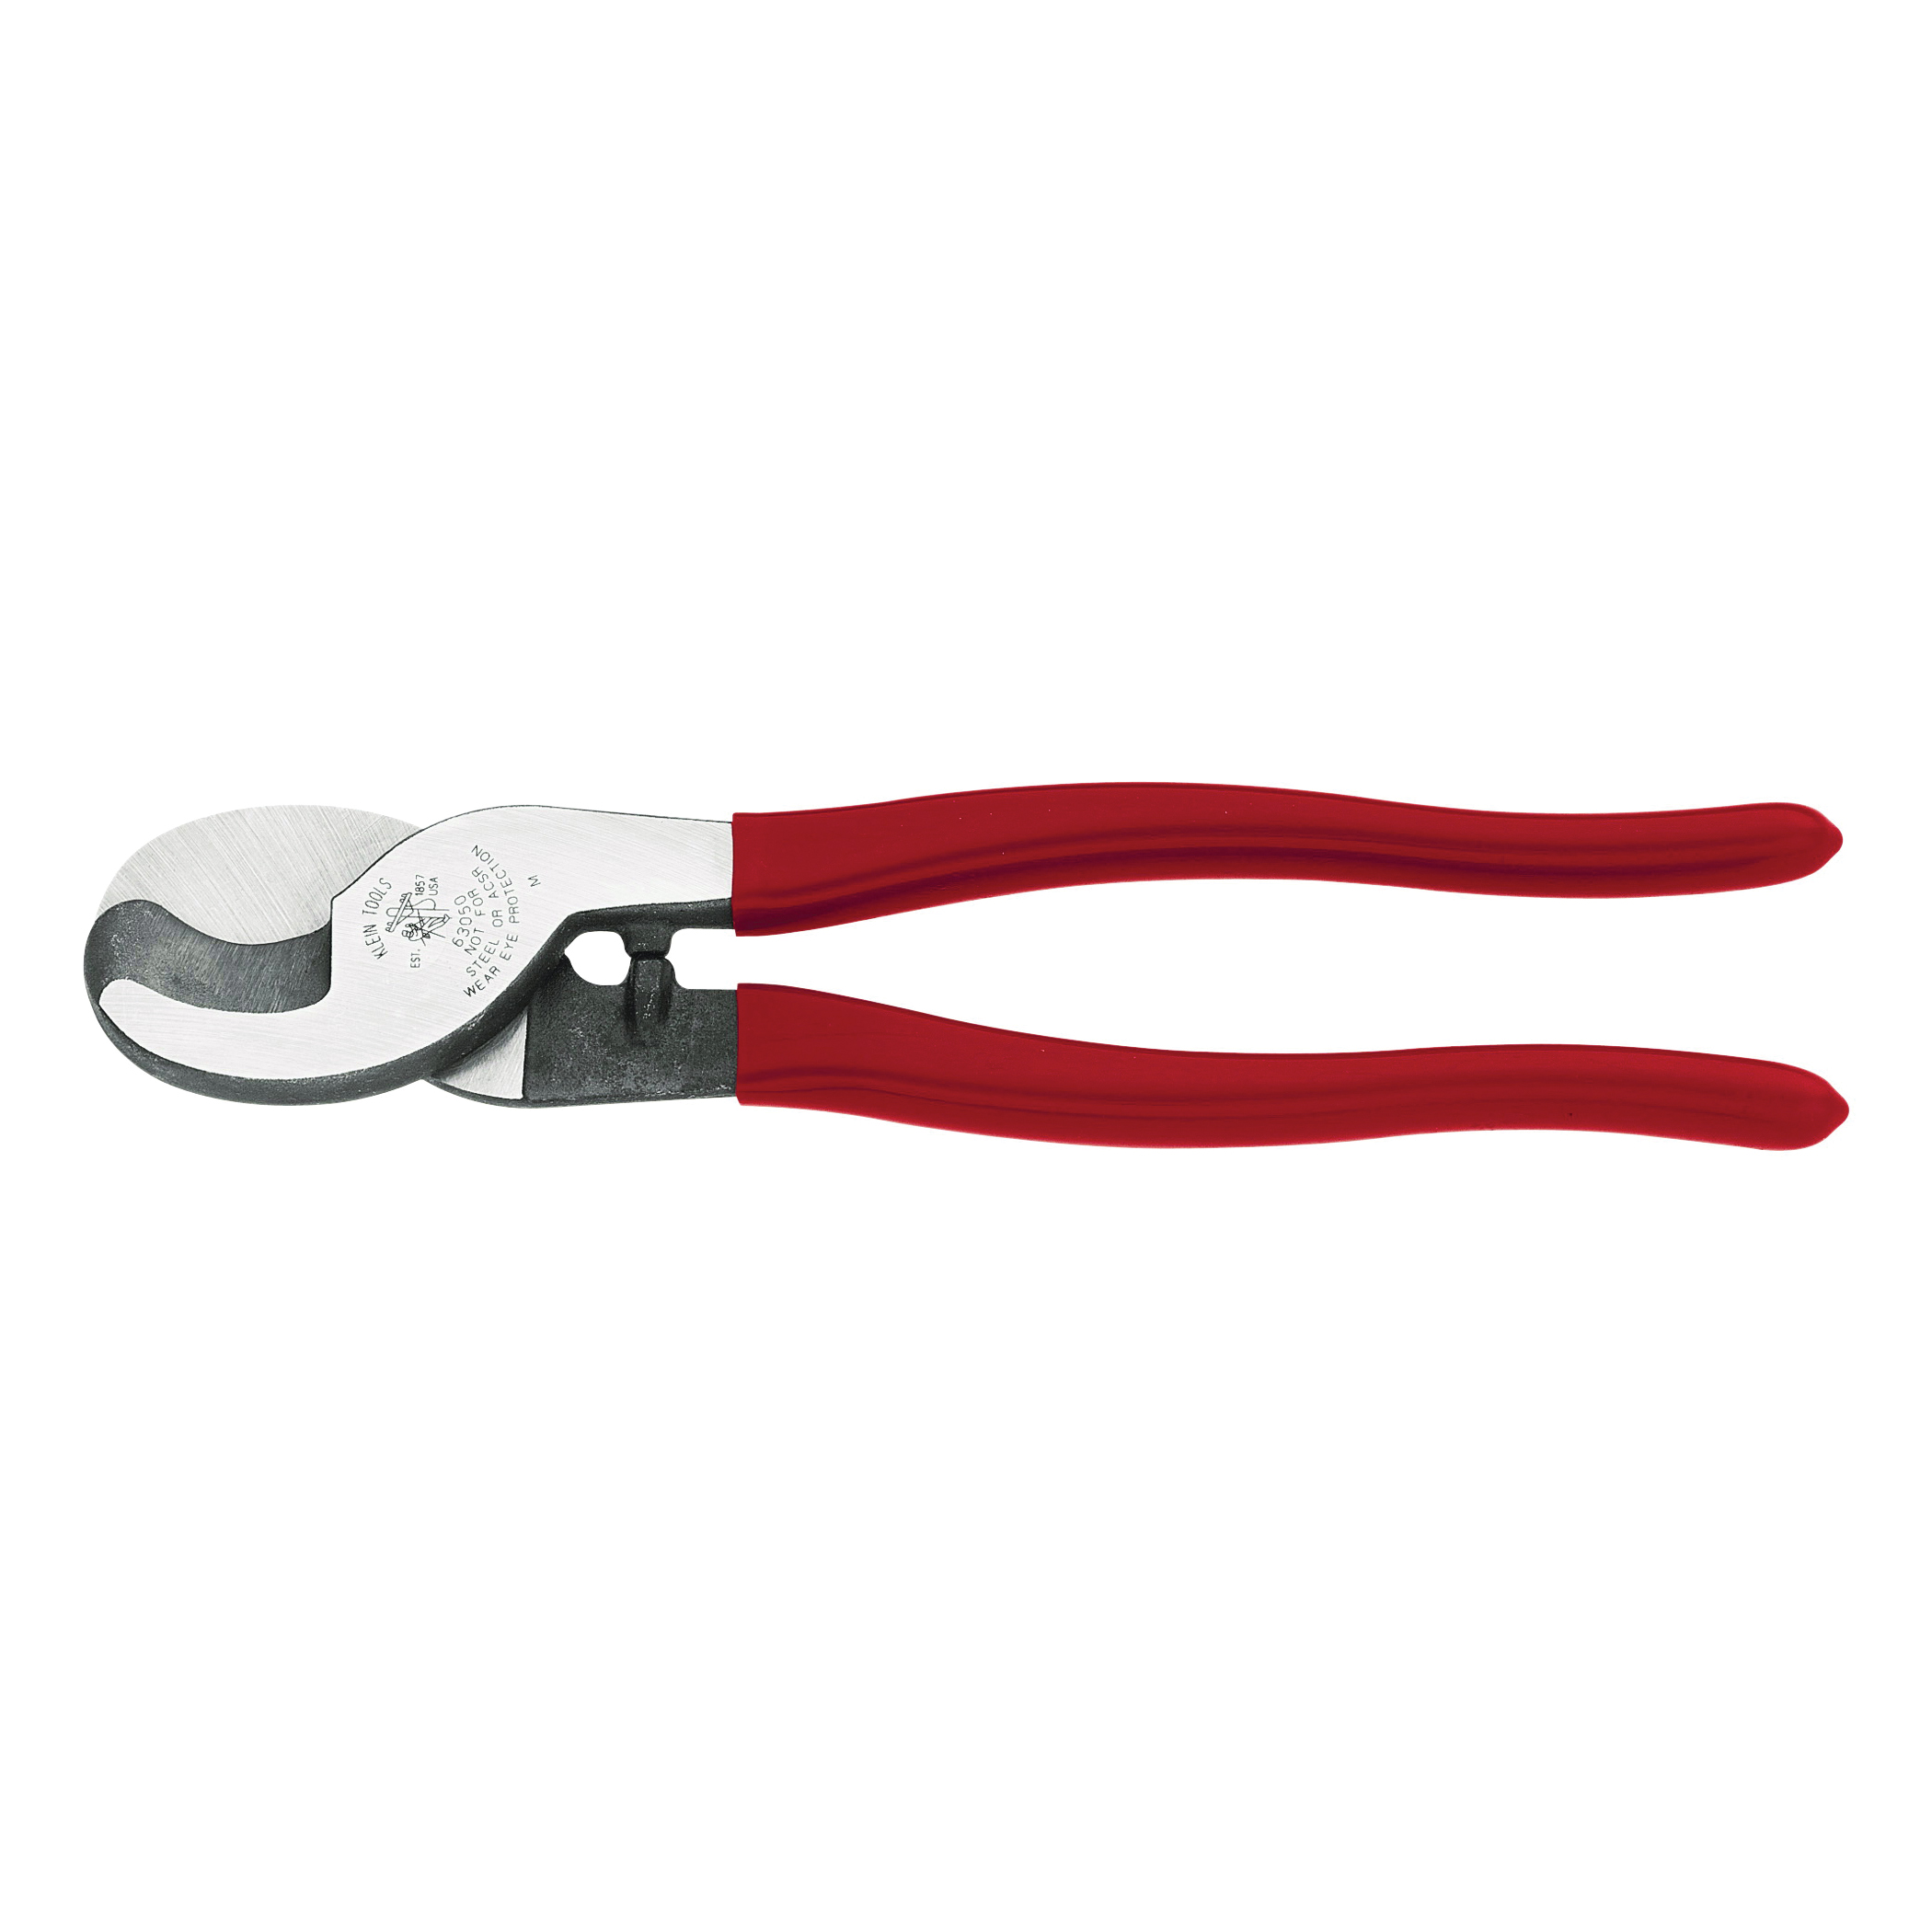 KLEIN TOOLS 63050 Cable Cutter, 9-1/2 in OAL, Steel Jaw, Cushion-Grip Handle, Red Handle - 1